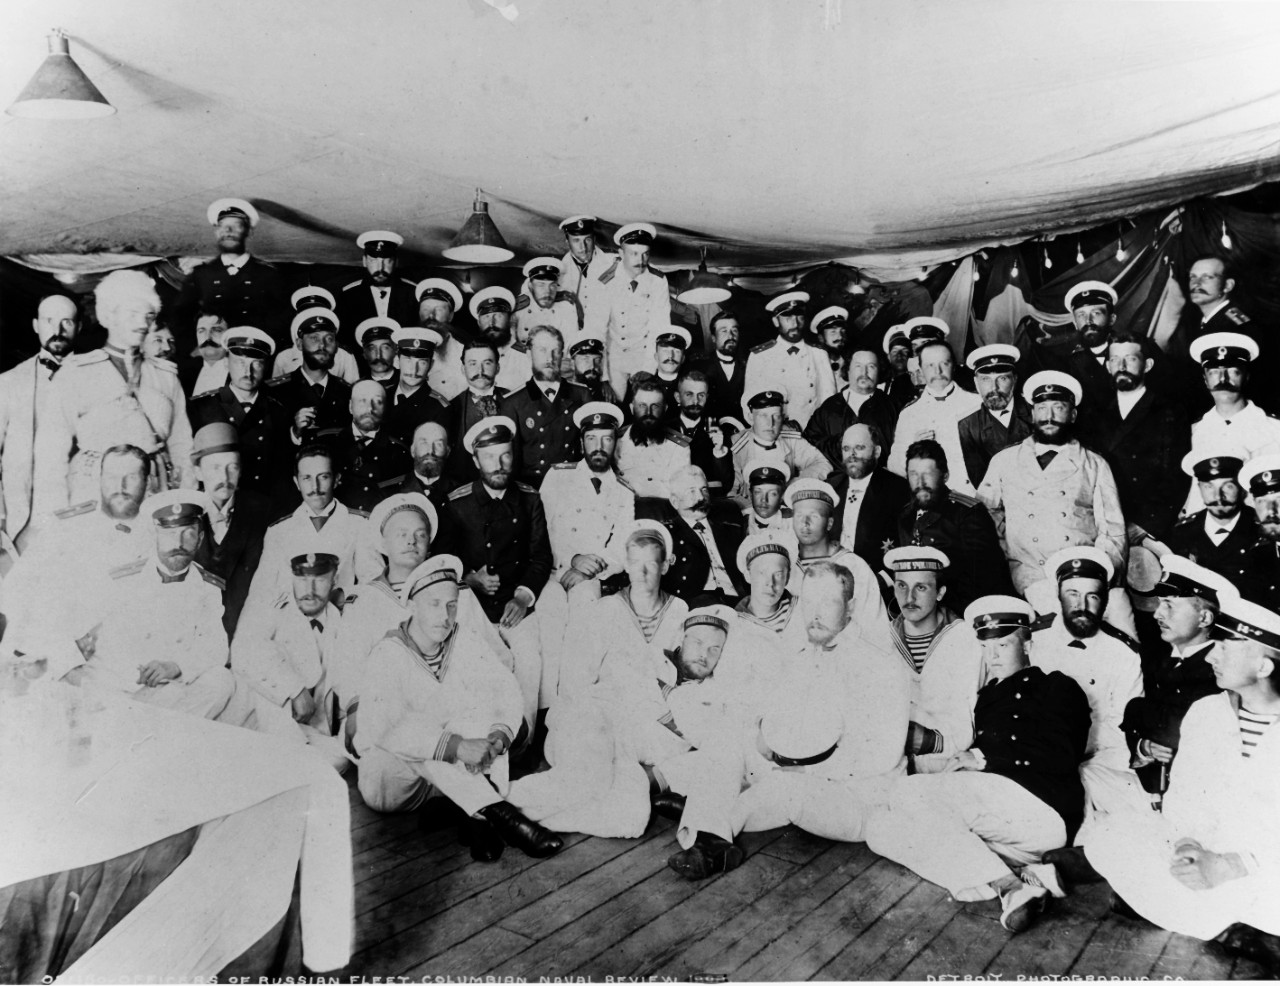 Russian naval officers and sailors aboard one of their warships